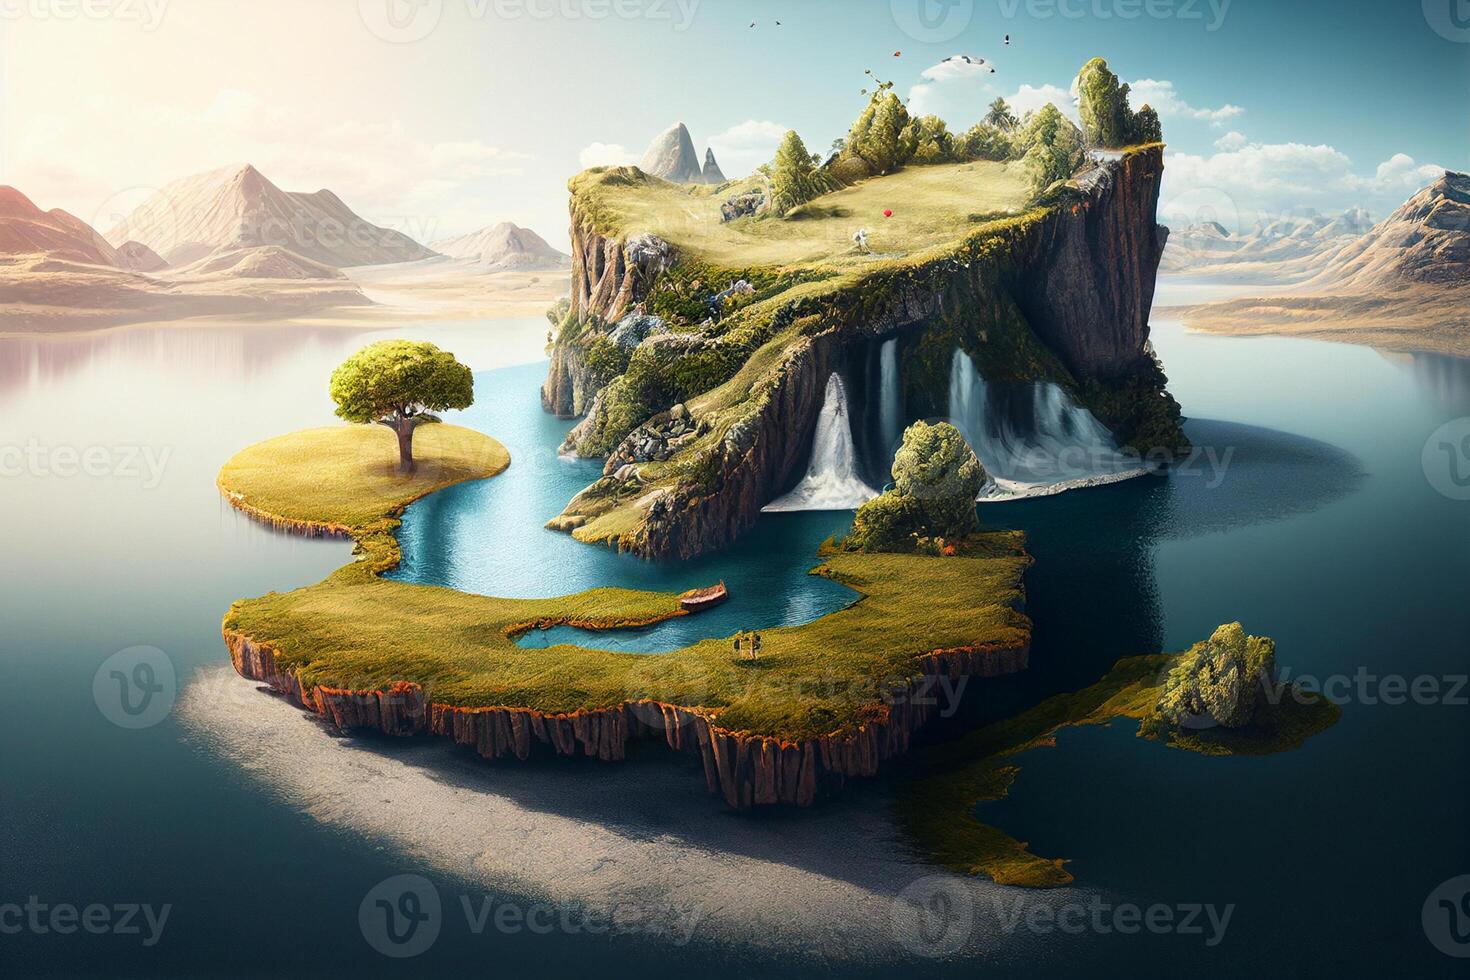 Fantasy island with trees and lake. 3d render illustration. photo